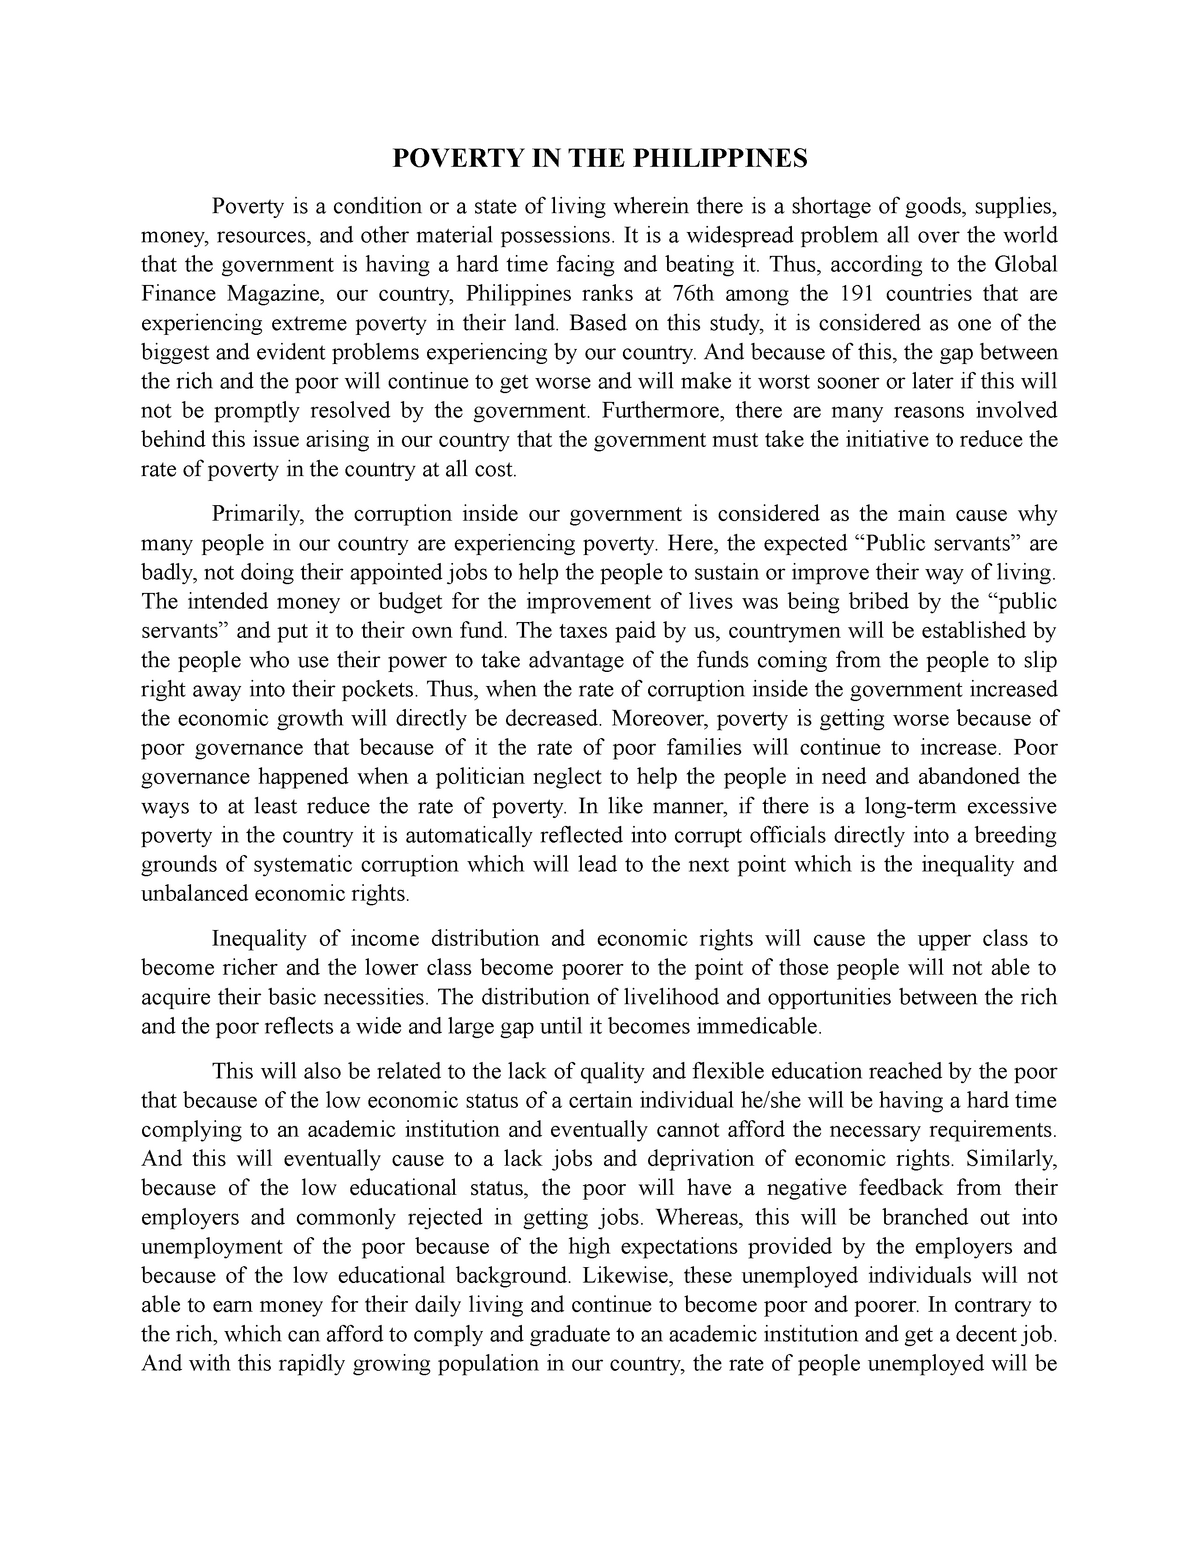 poverty and homelessness in the philippines research paper